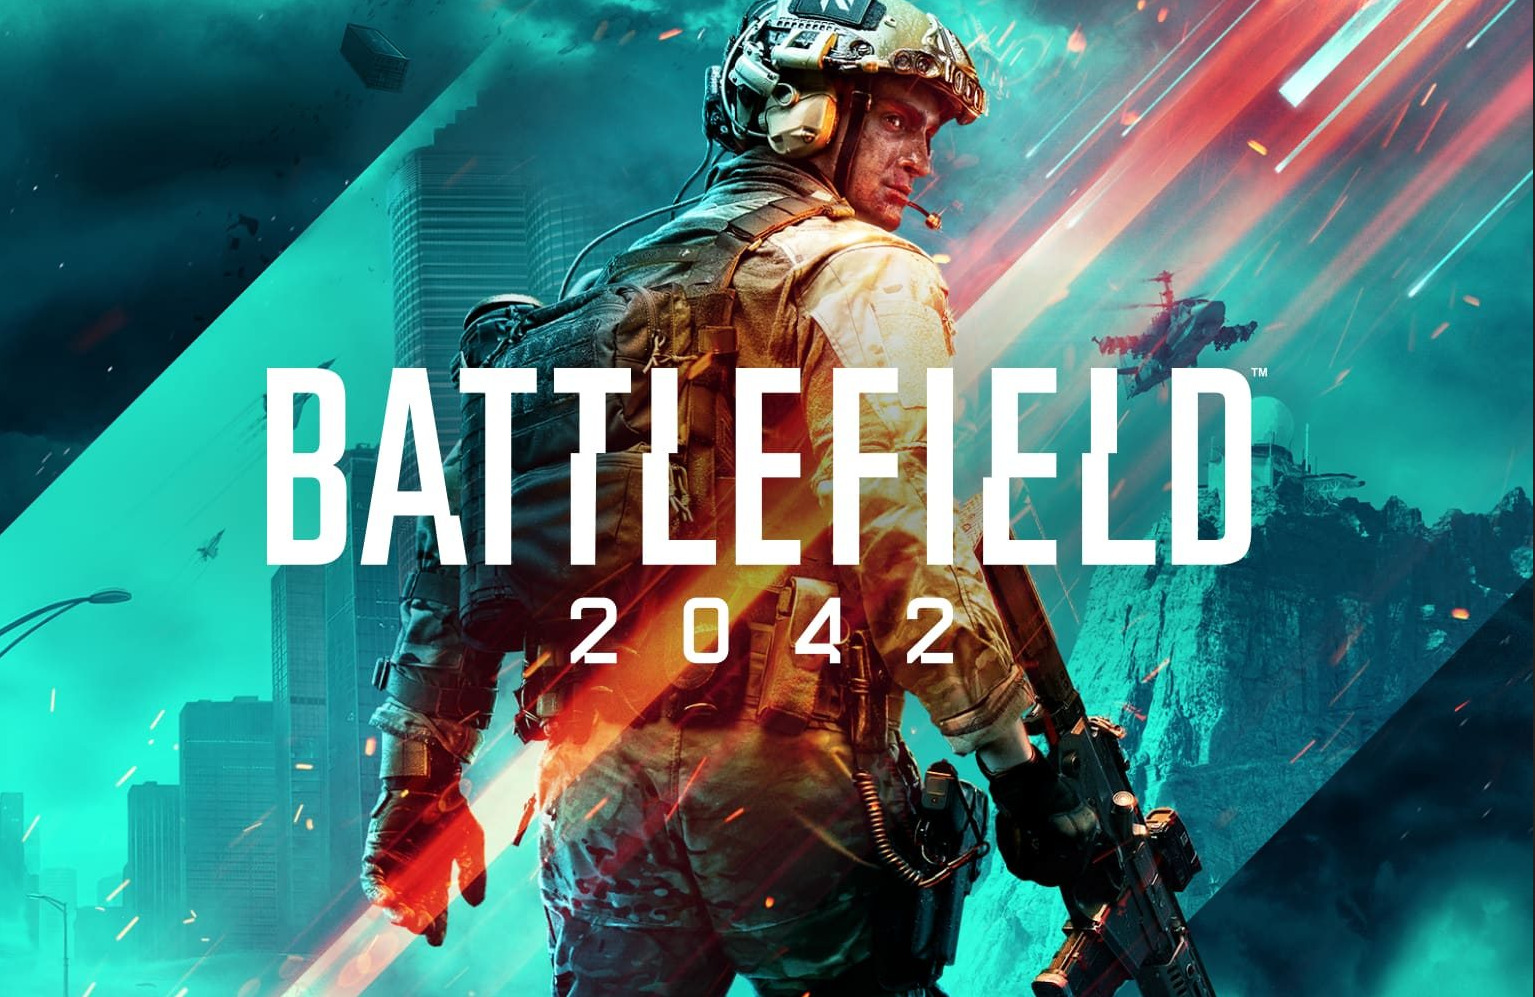 Battlefield 2042 Which Edition to Choose